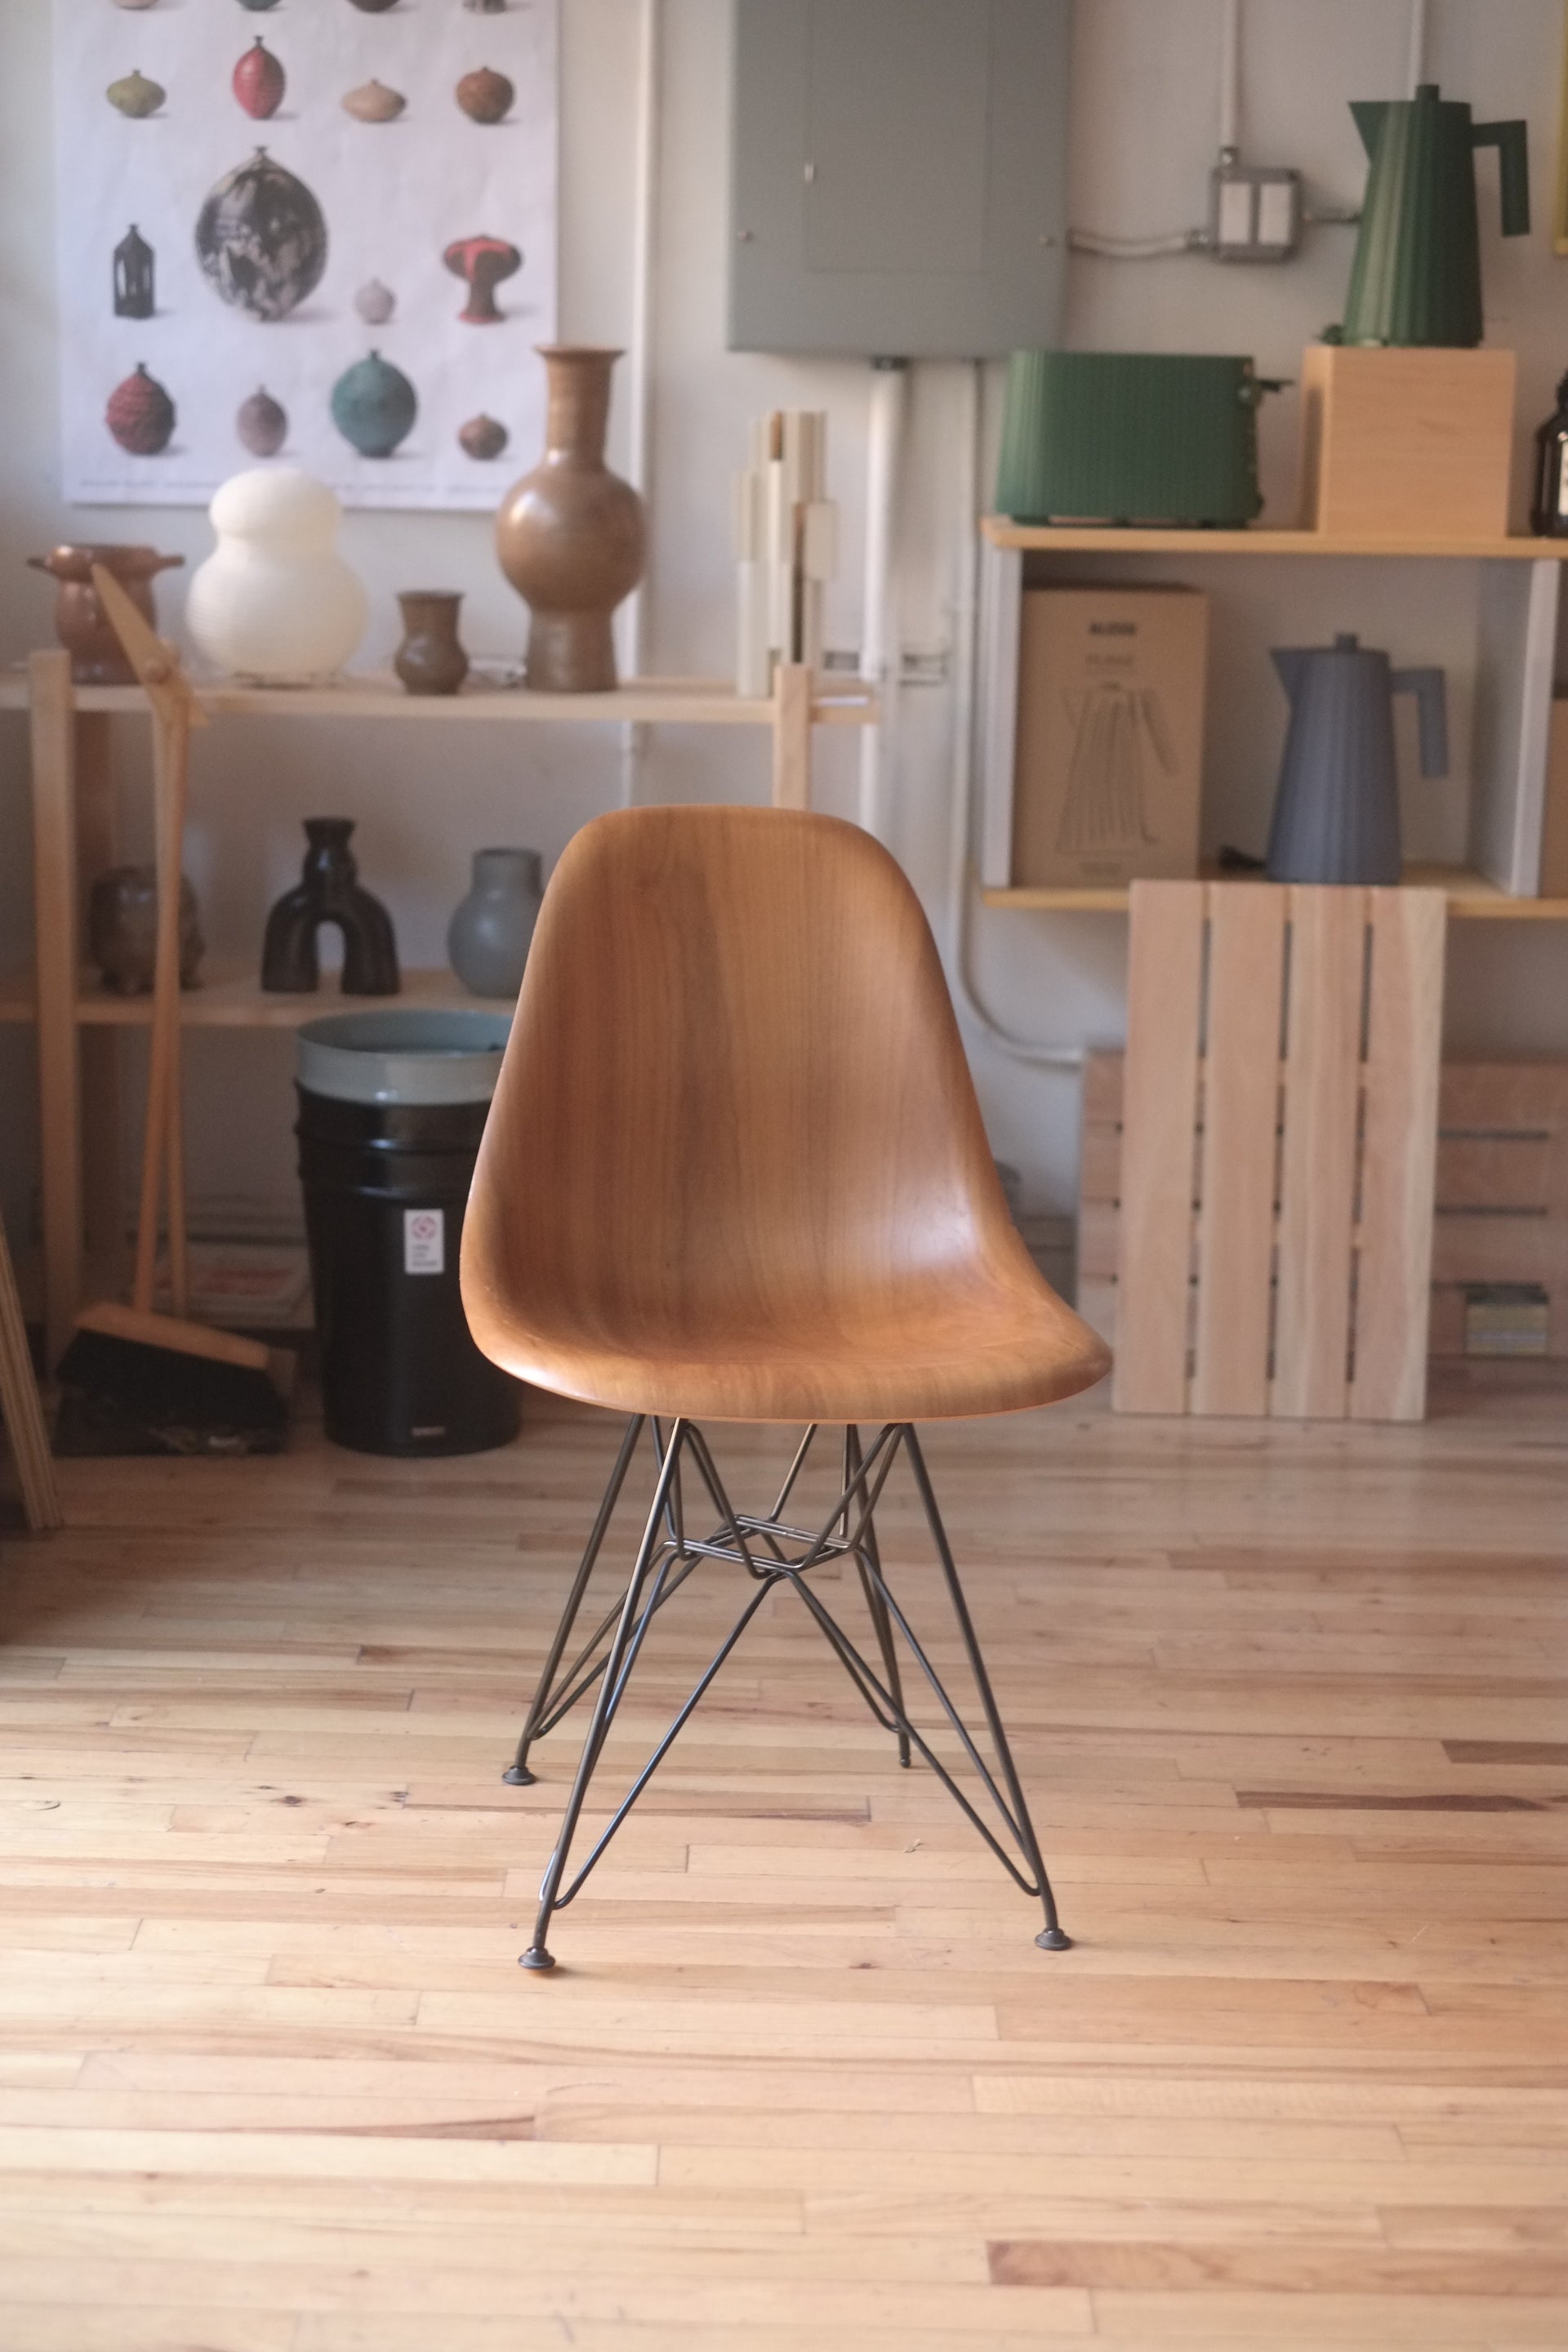 Eames Molded Wood Chairs